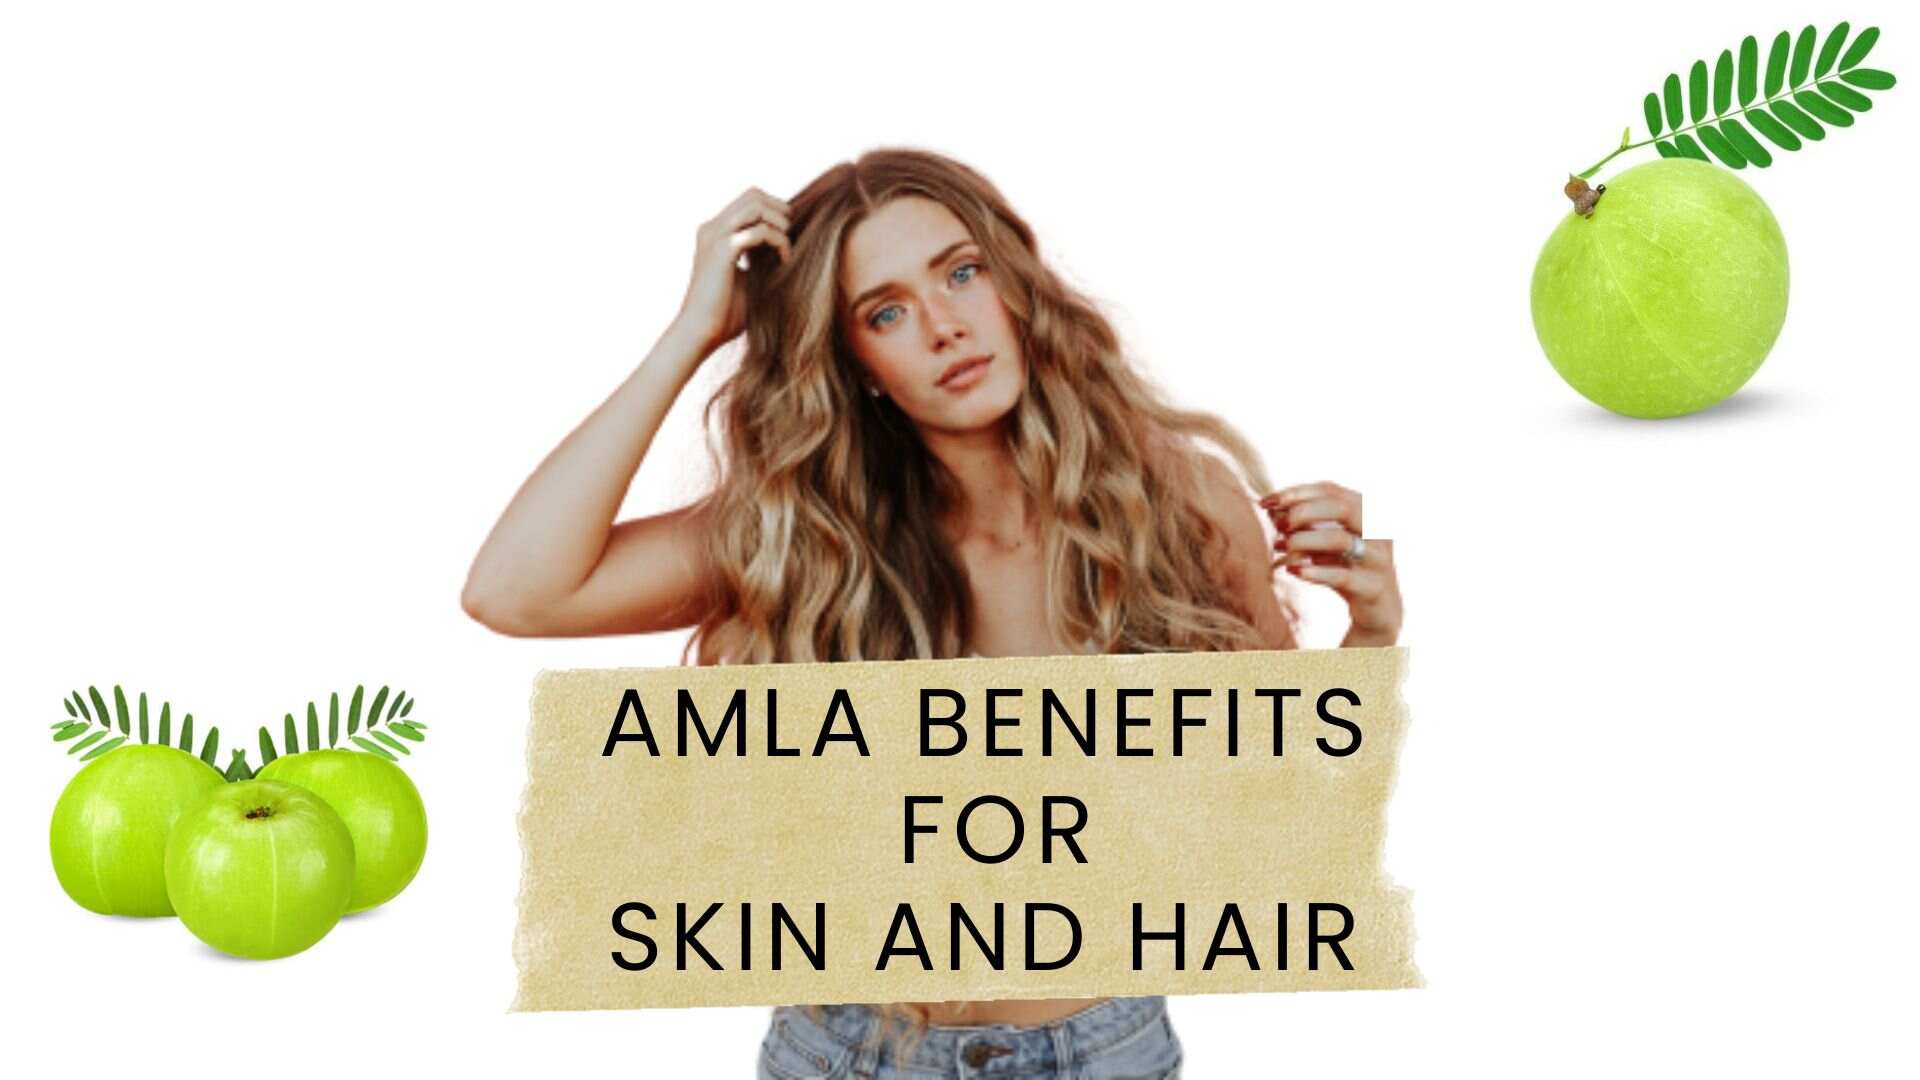 amla benefits for skin and hair